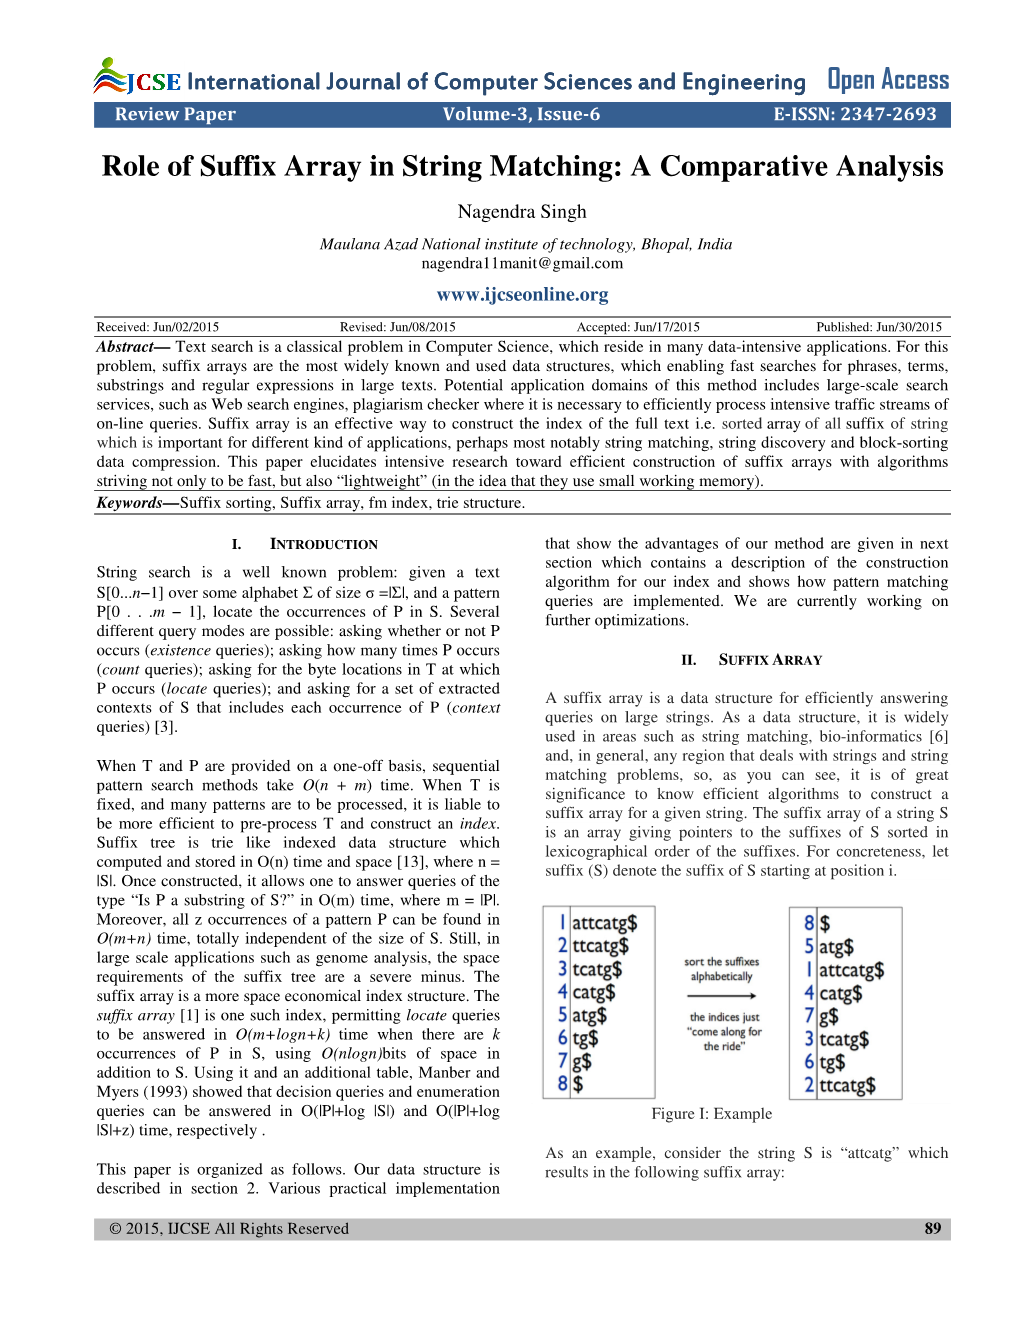 Role of Suffix Array in String Matching: a Comparative Analysis